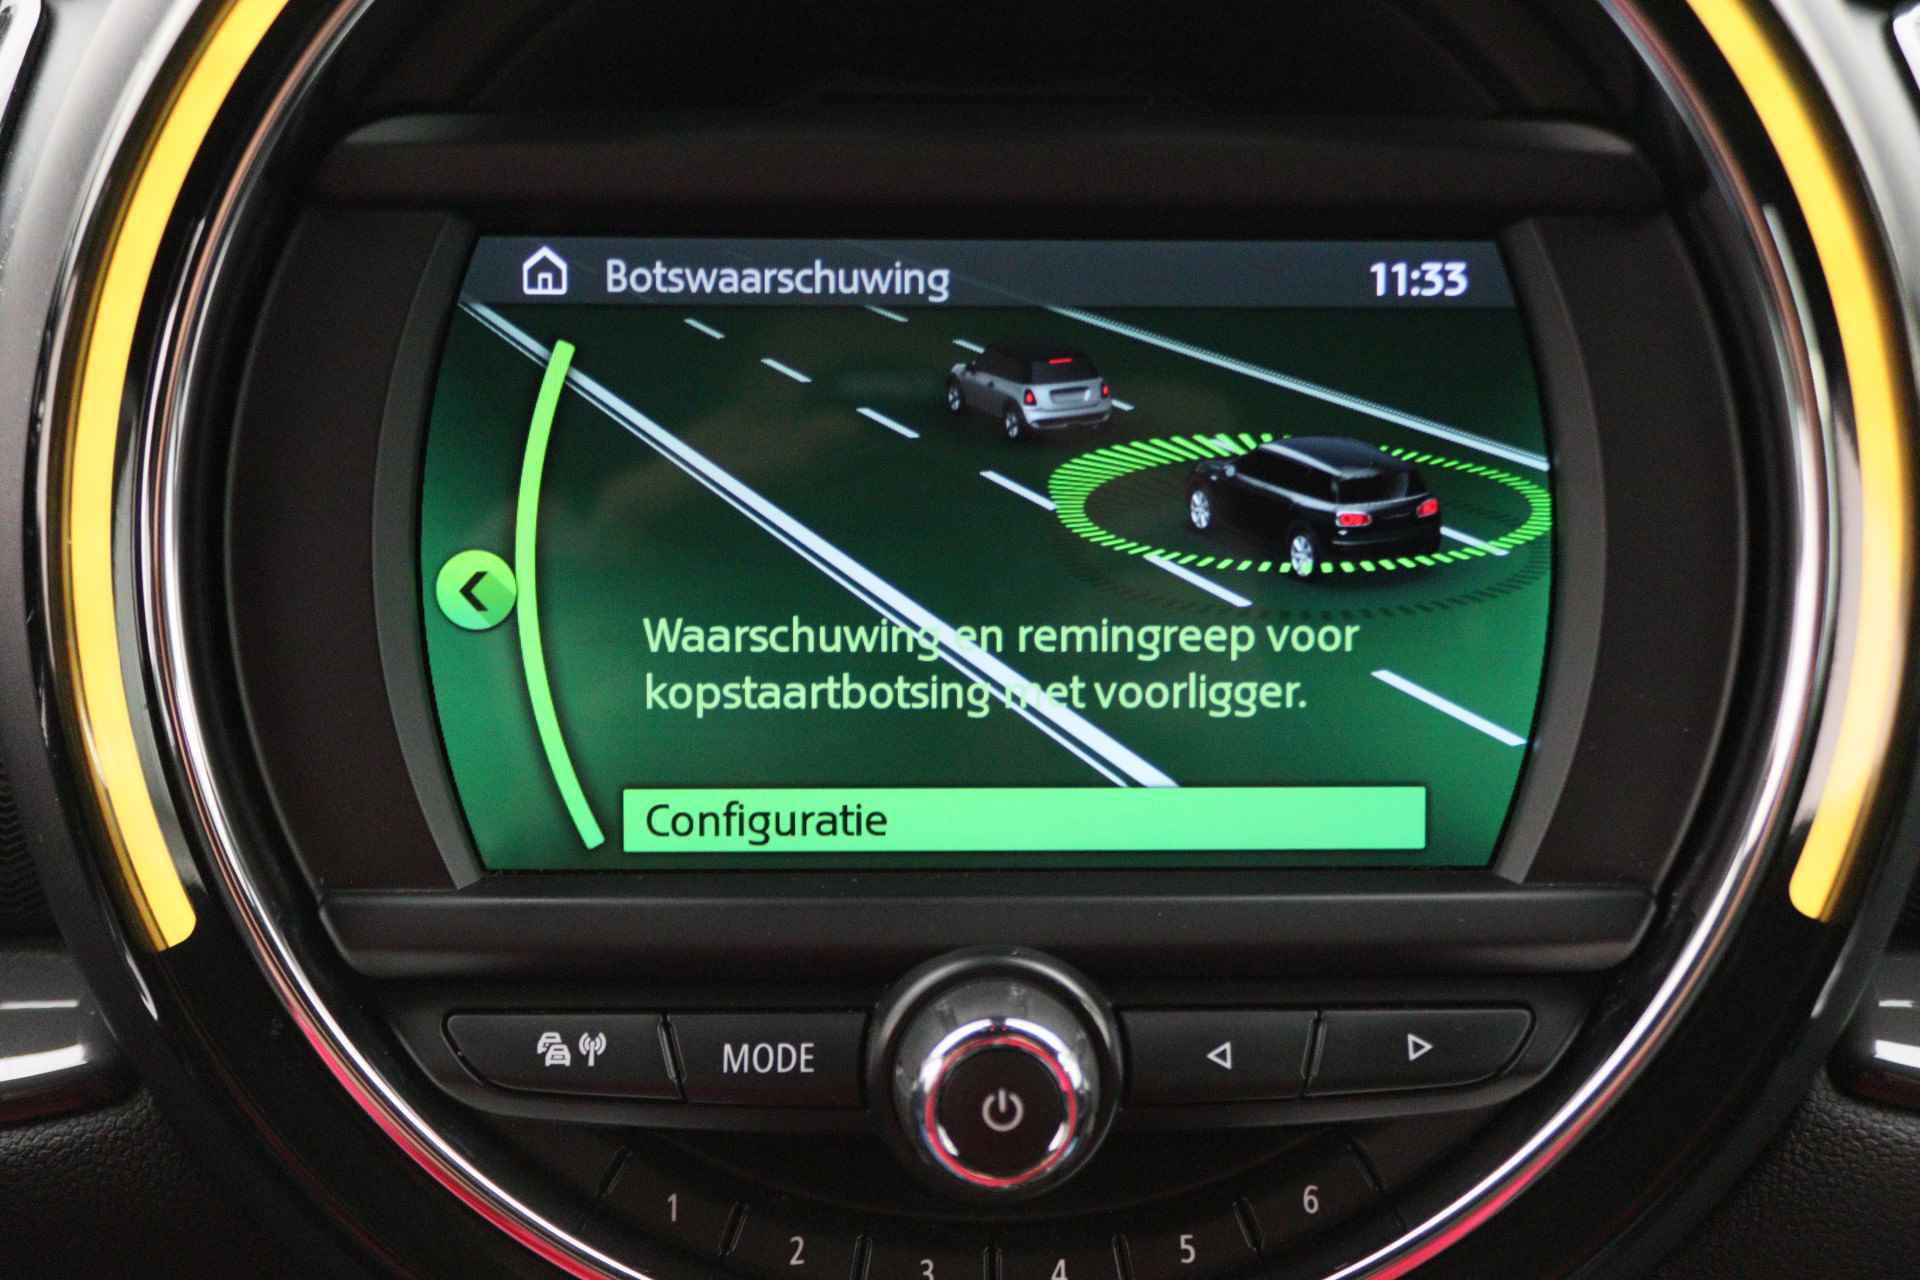 MINI Clubman 1.5 Cooper Business Edition Automaat LED, Keyless, Two-Tone lak, Navigatie, Cruise, PDC, Climate, 17” - 32/44